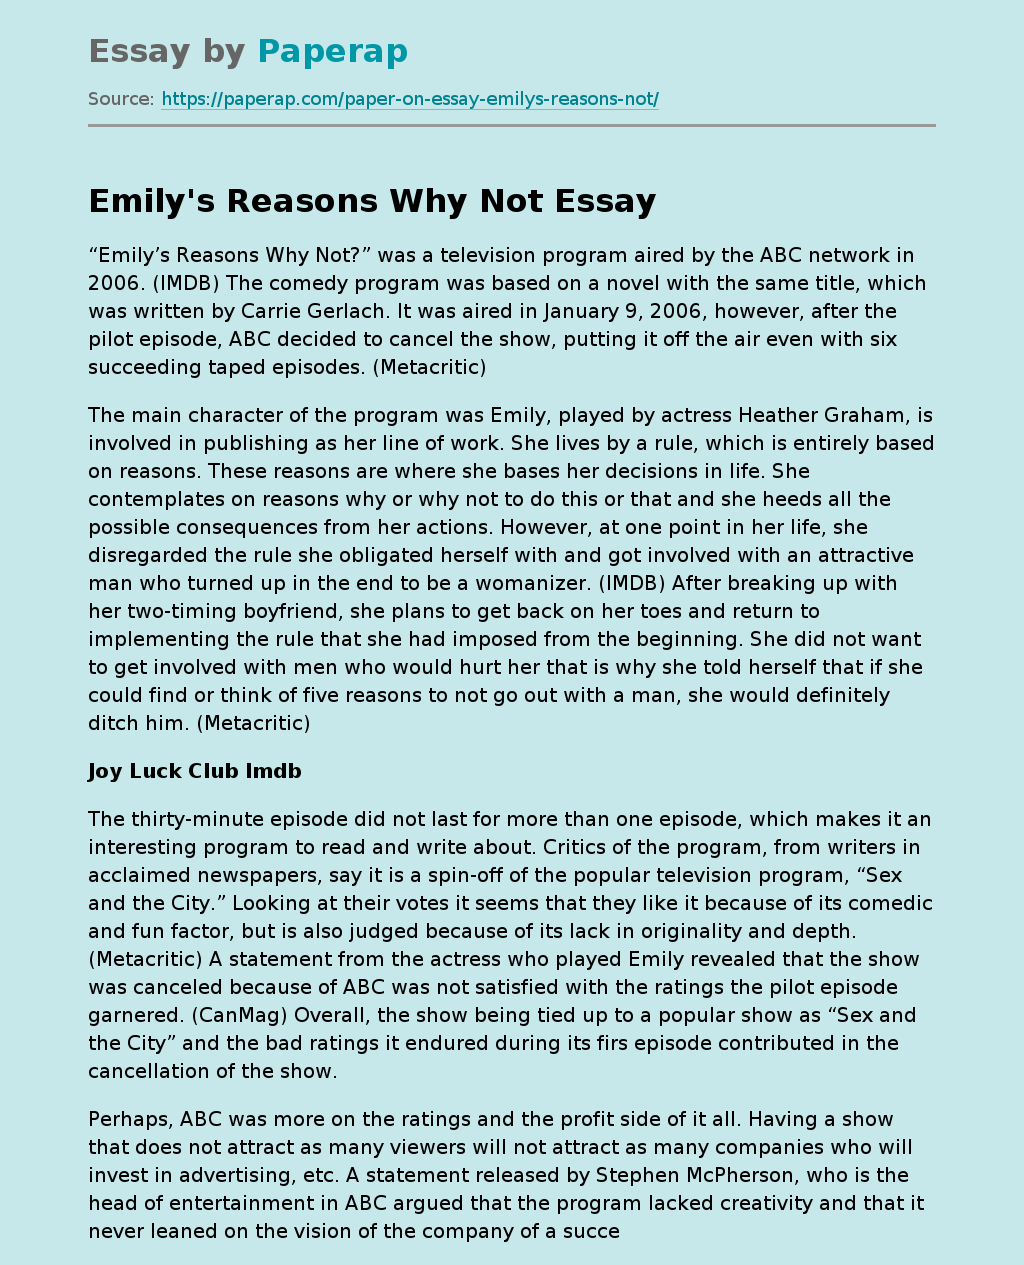 Emily's Reasons Why Not